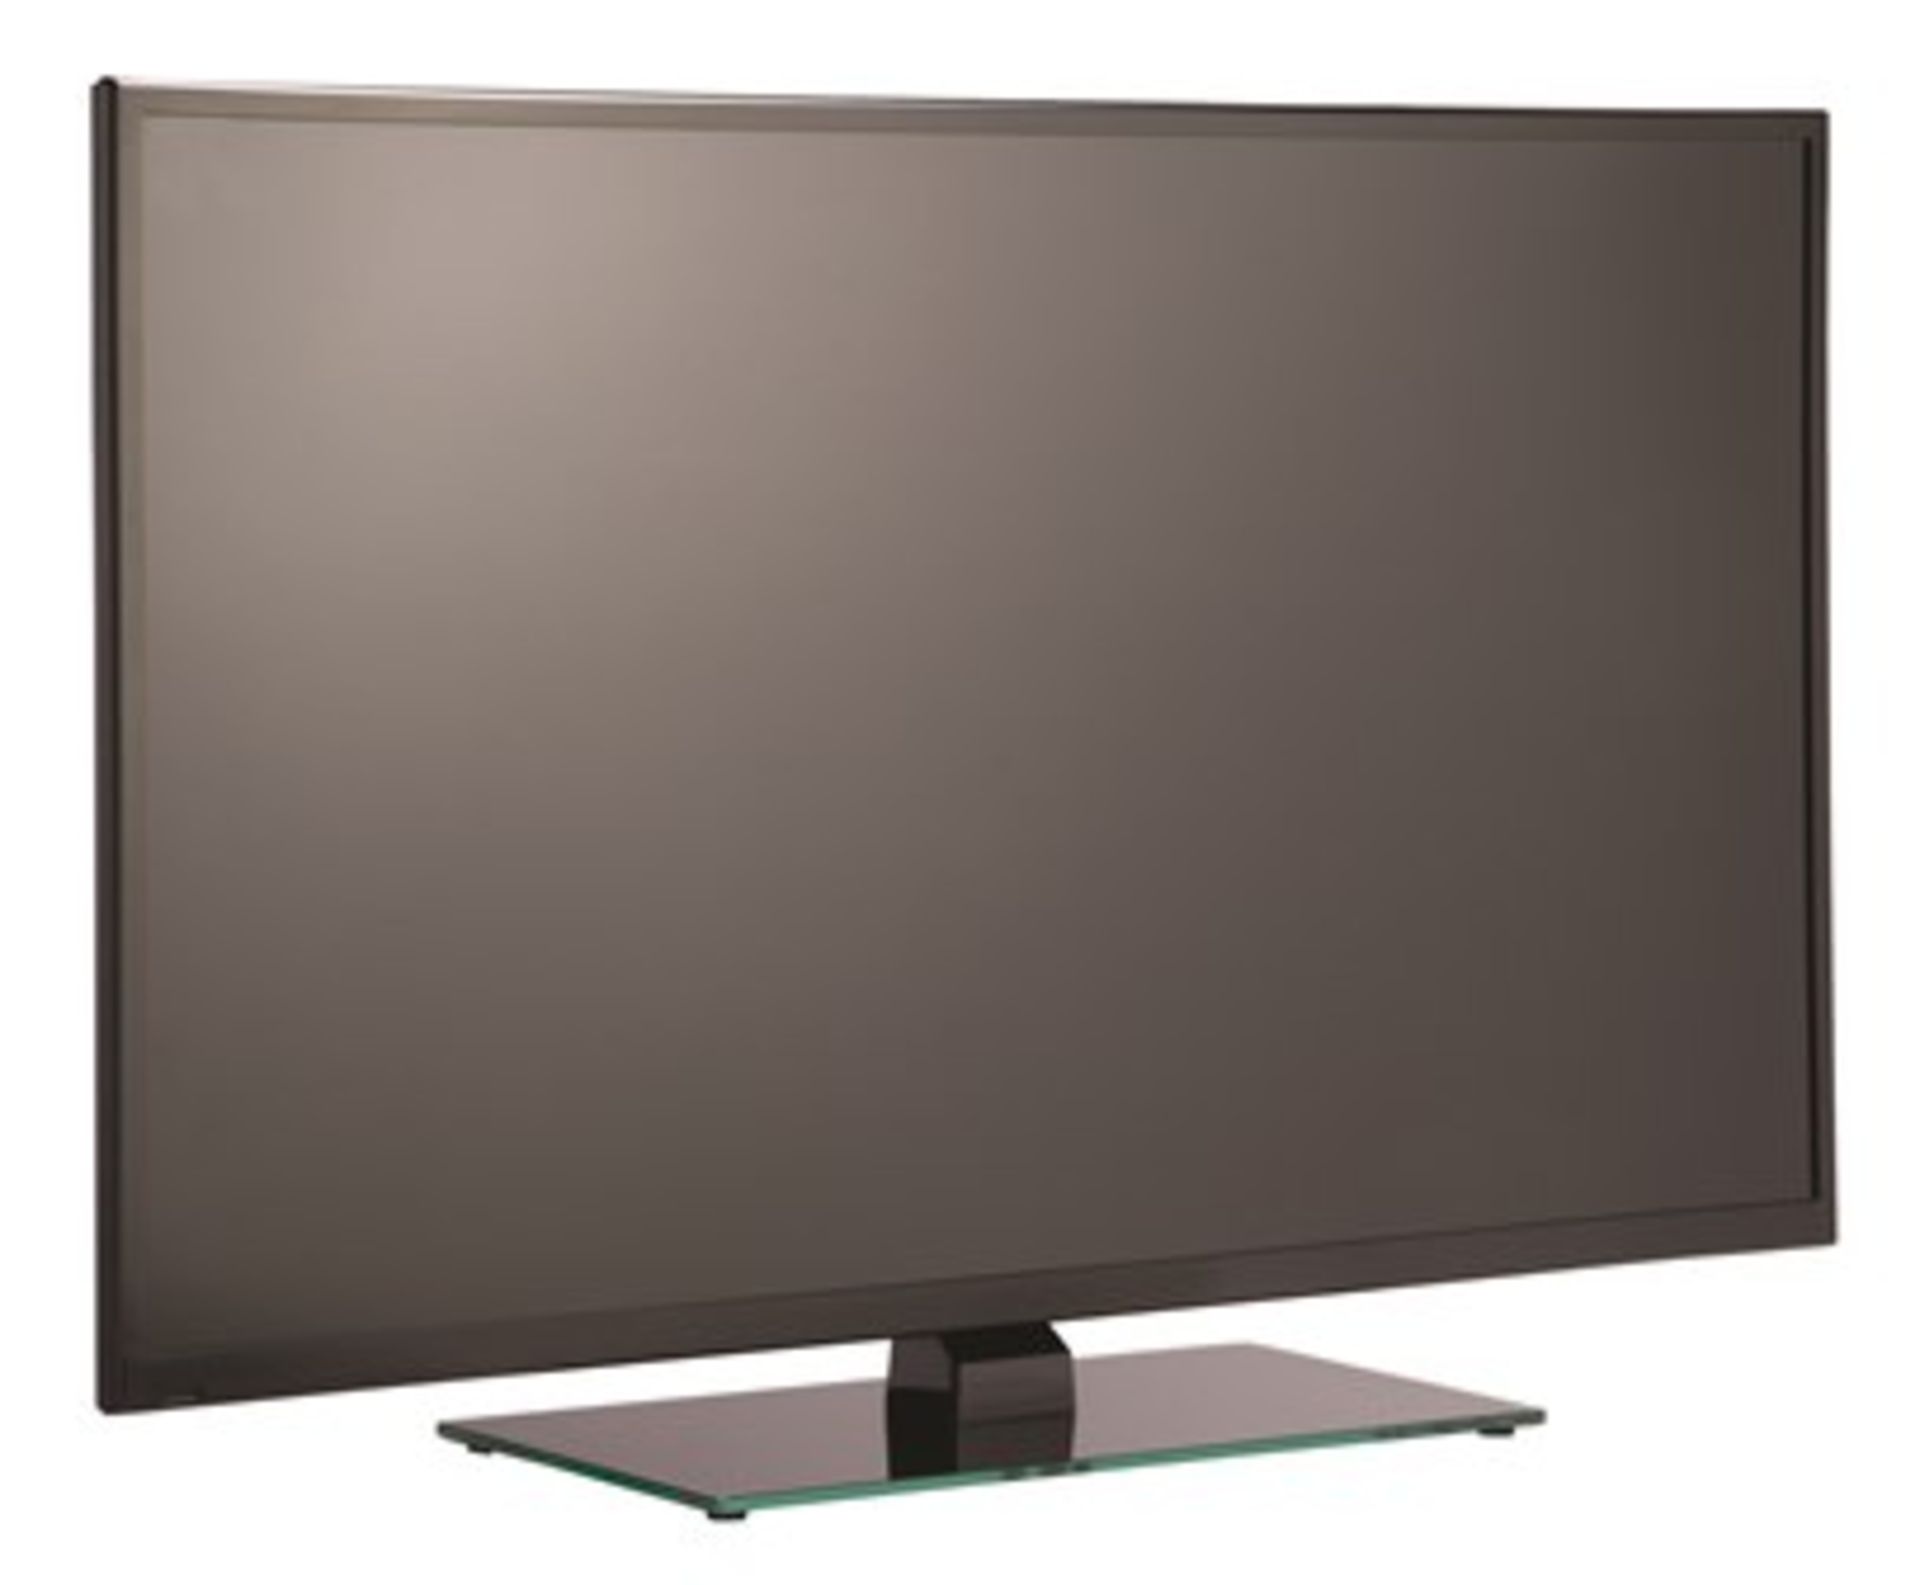 Ex display reboxed - Our House branded 46" Full HD LED TV with USB Media and PVR Function